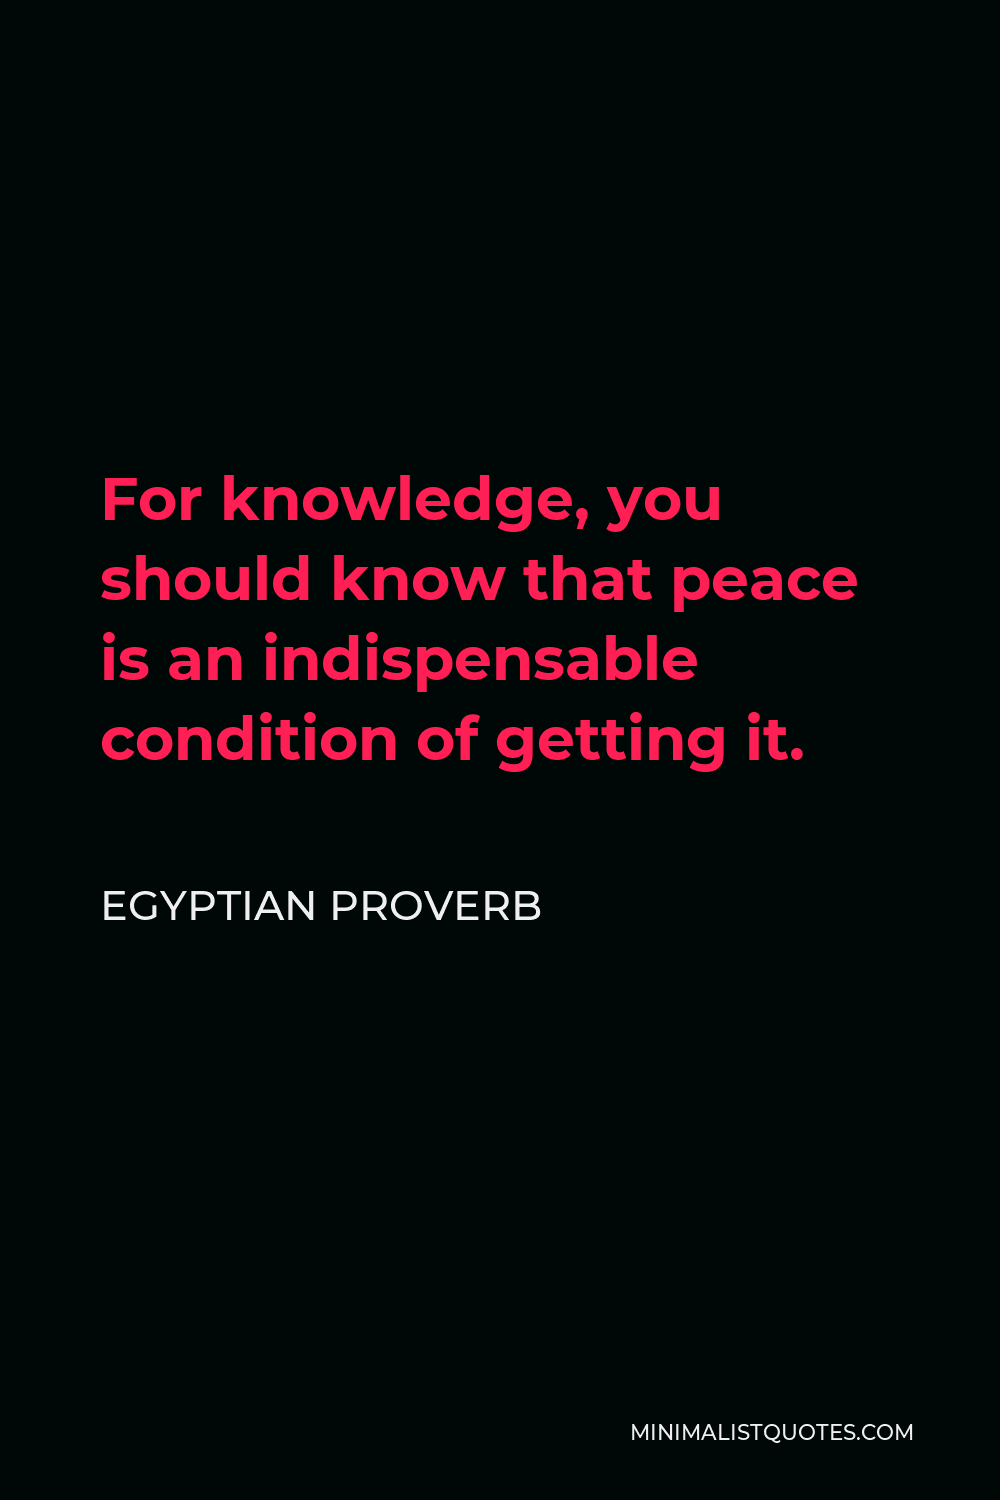 Egyptian Proverb Quote - For knowledge, you should know that peace is an indispensable condition of getting it.